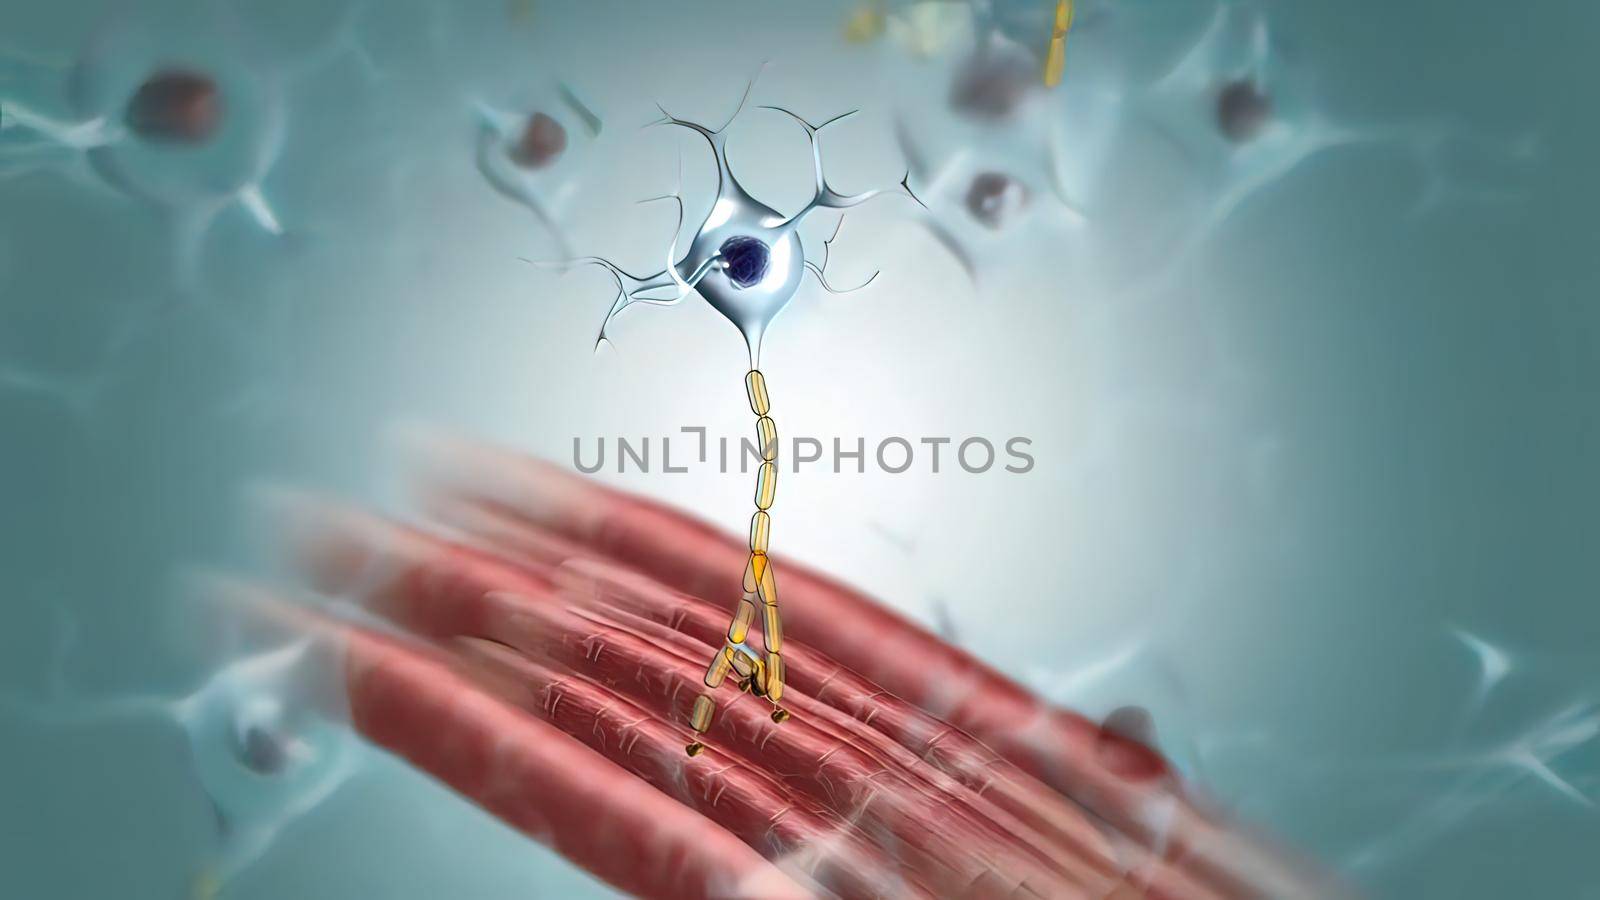 Motor Neuron and Muscle Relationships by creativepic